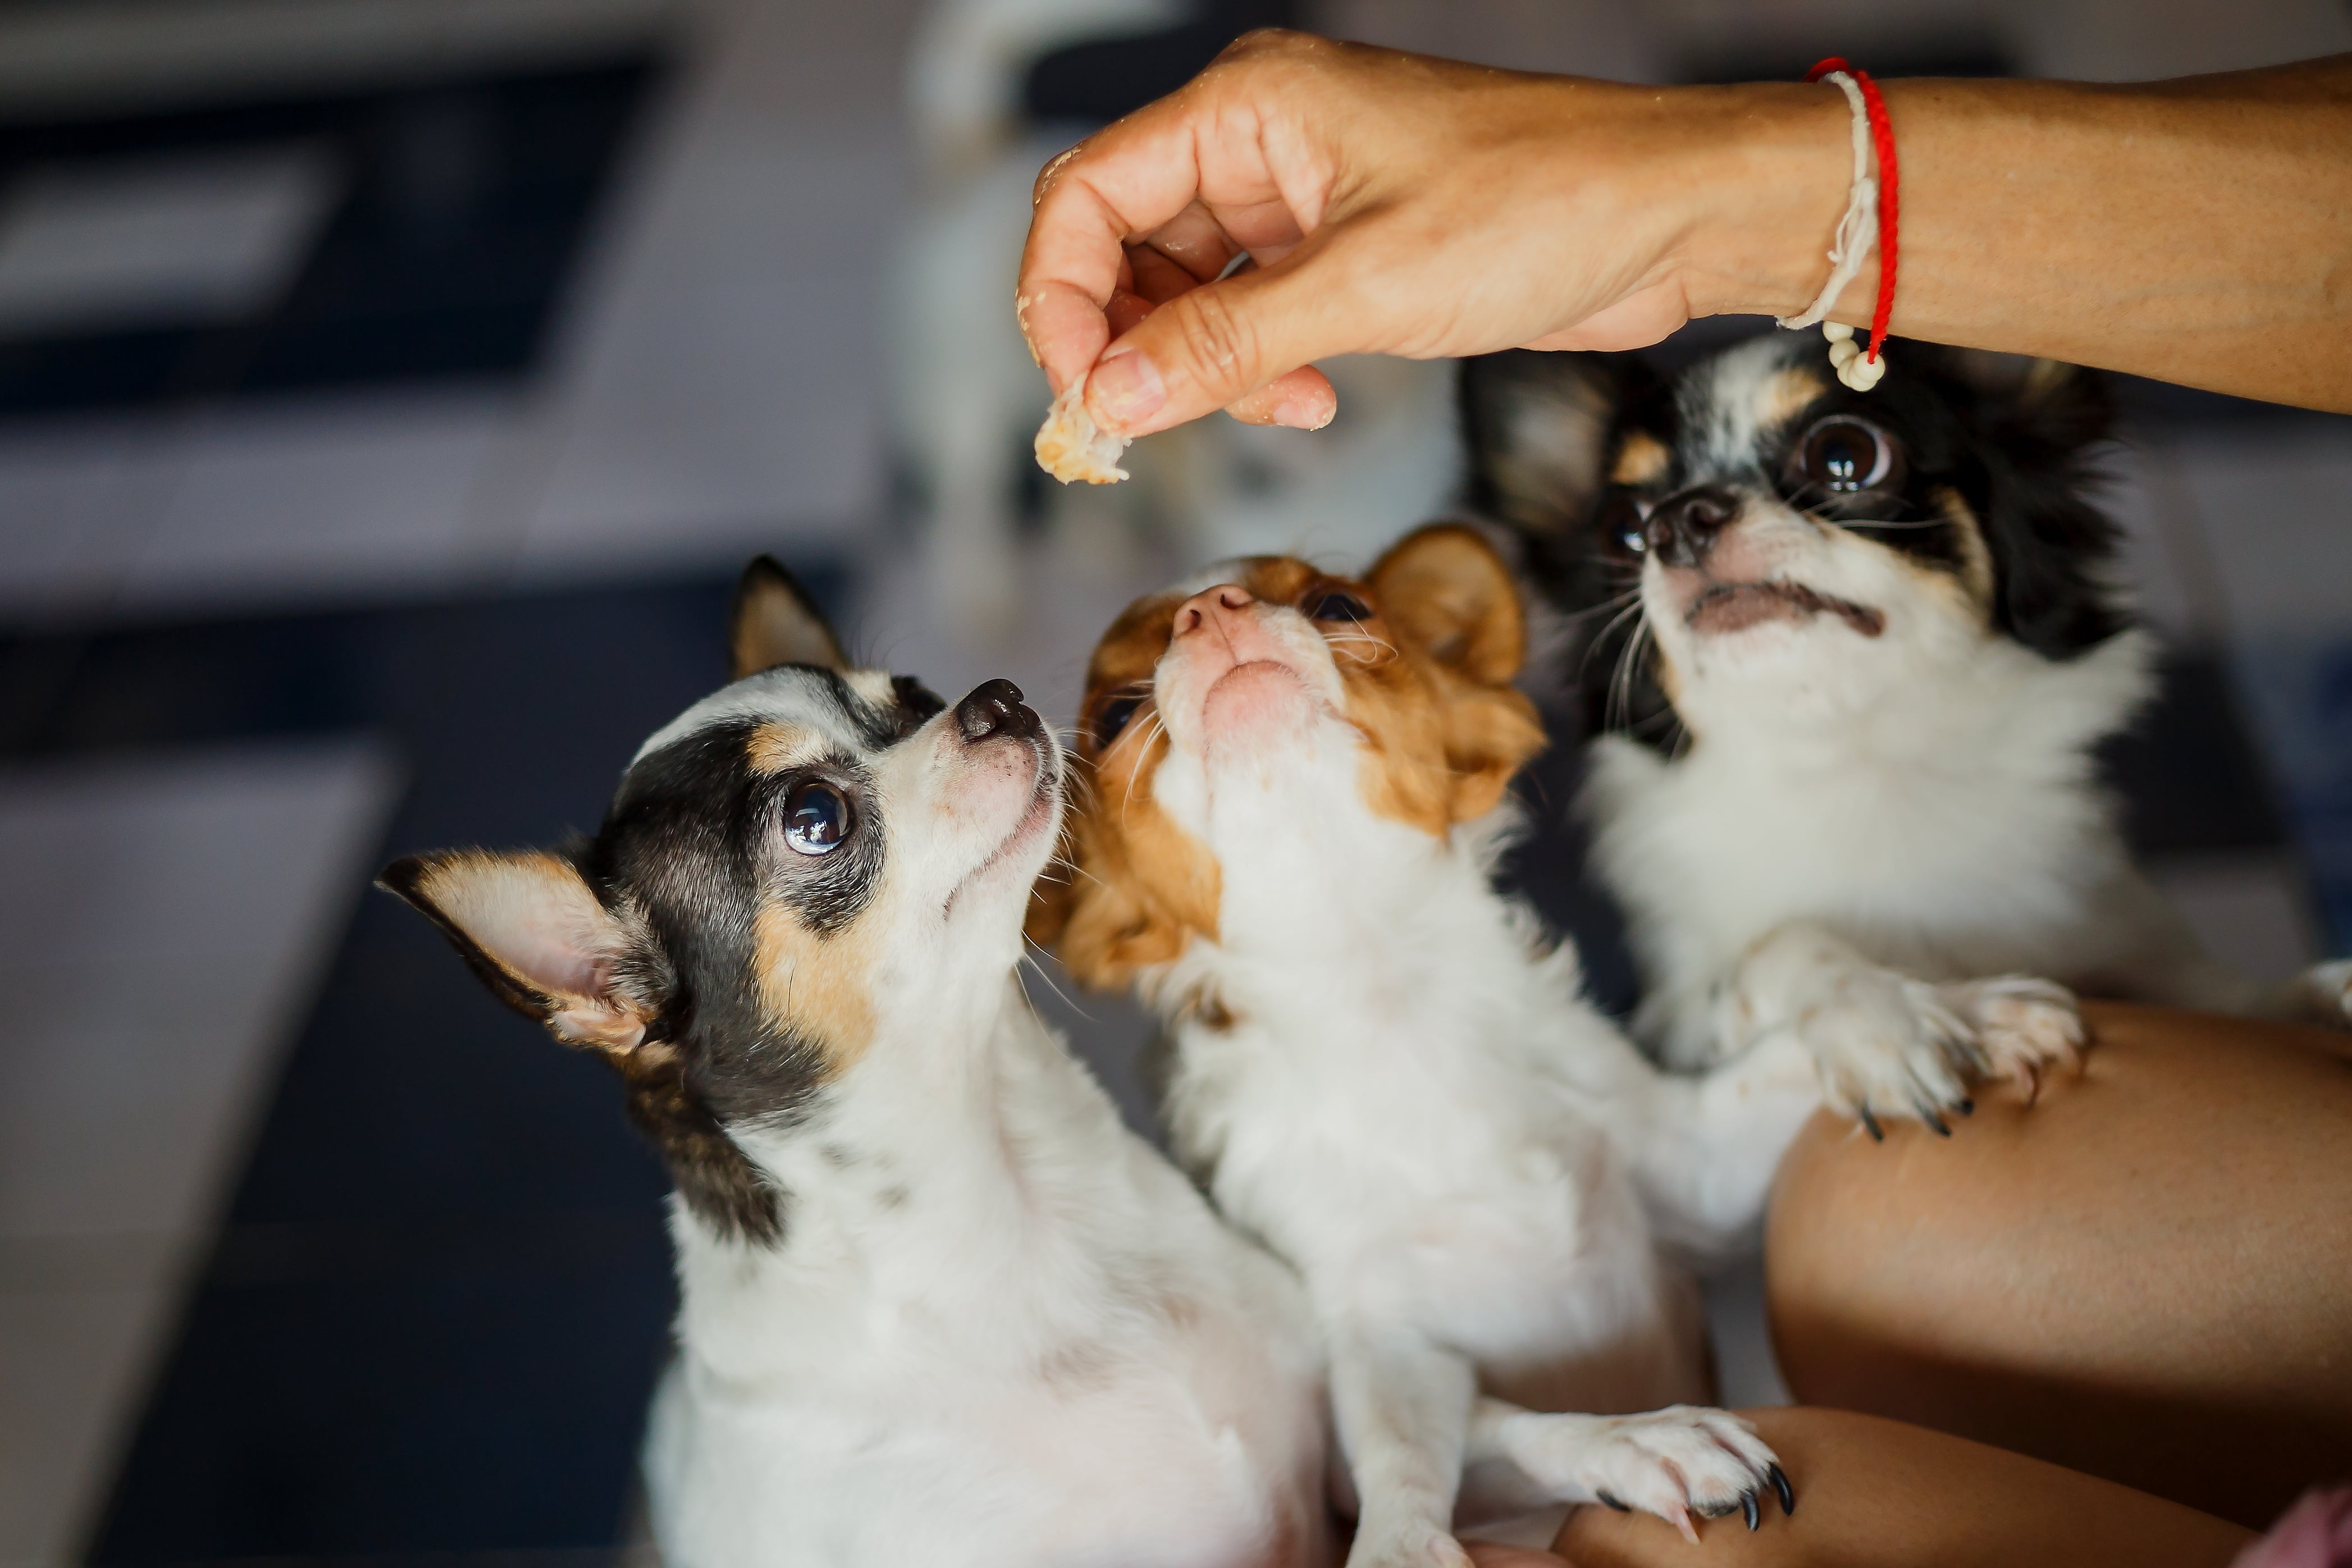 Three chihuahuas anticipating a treat offered by a white hand